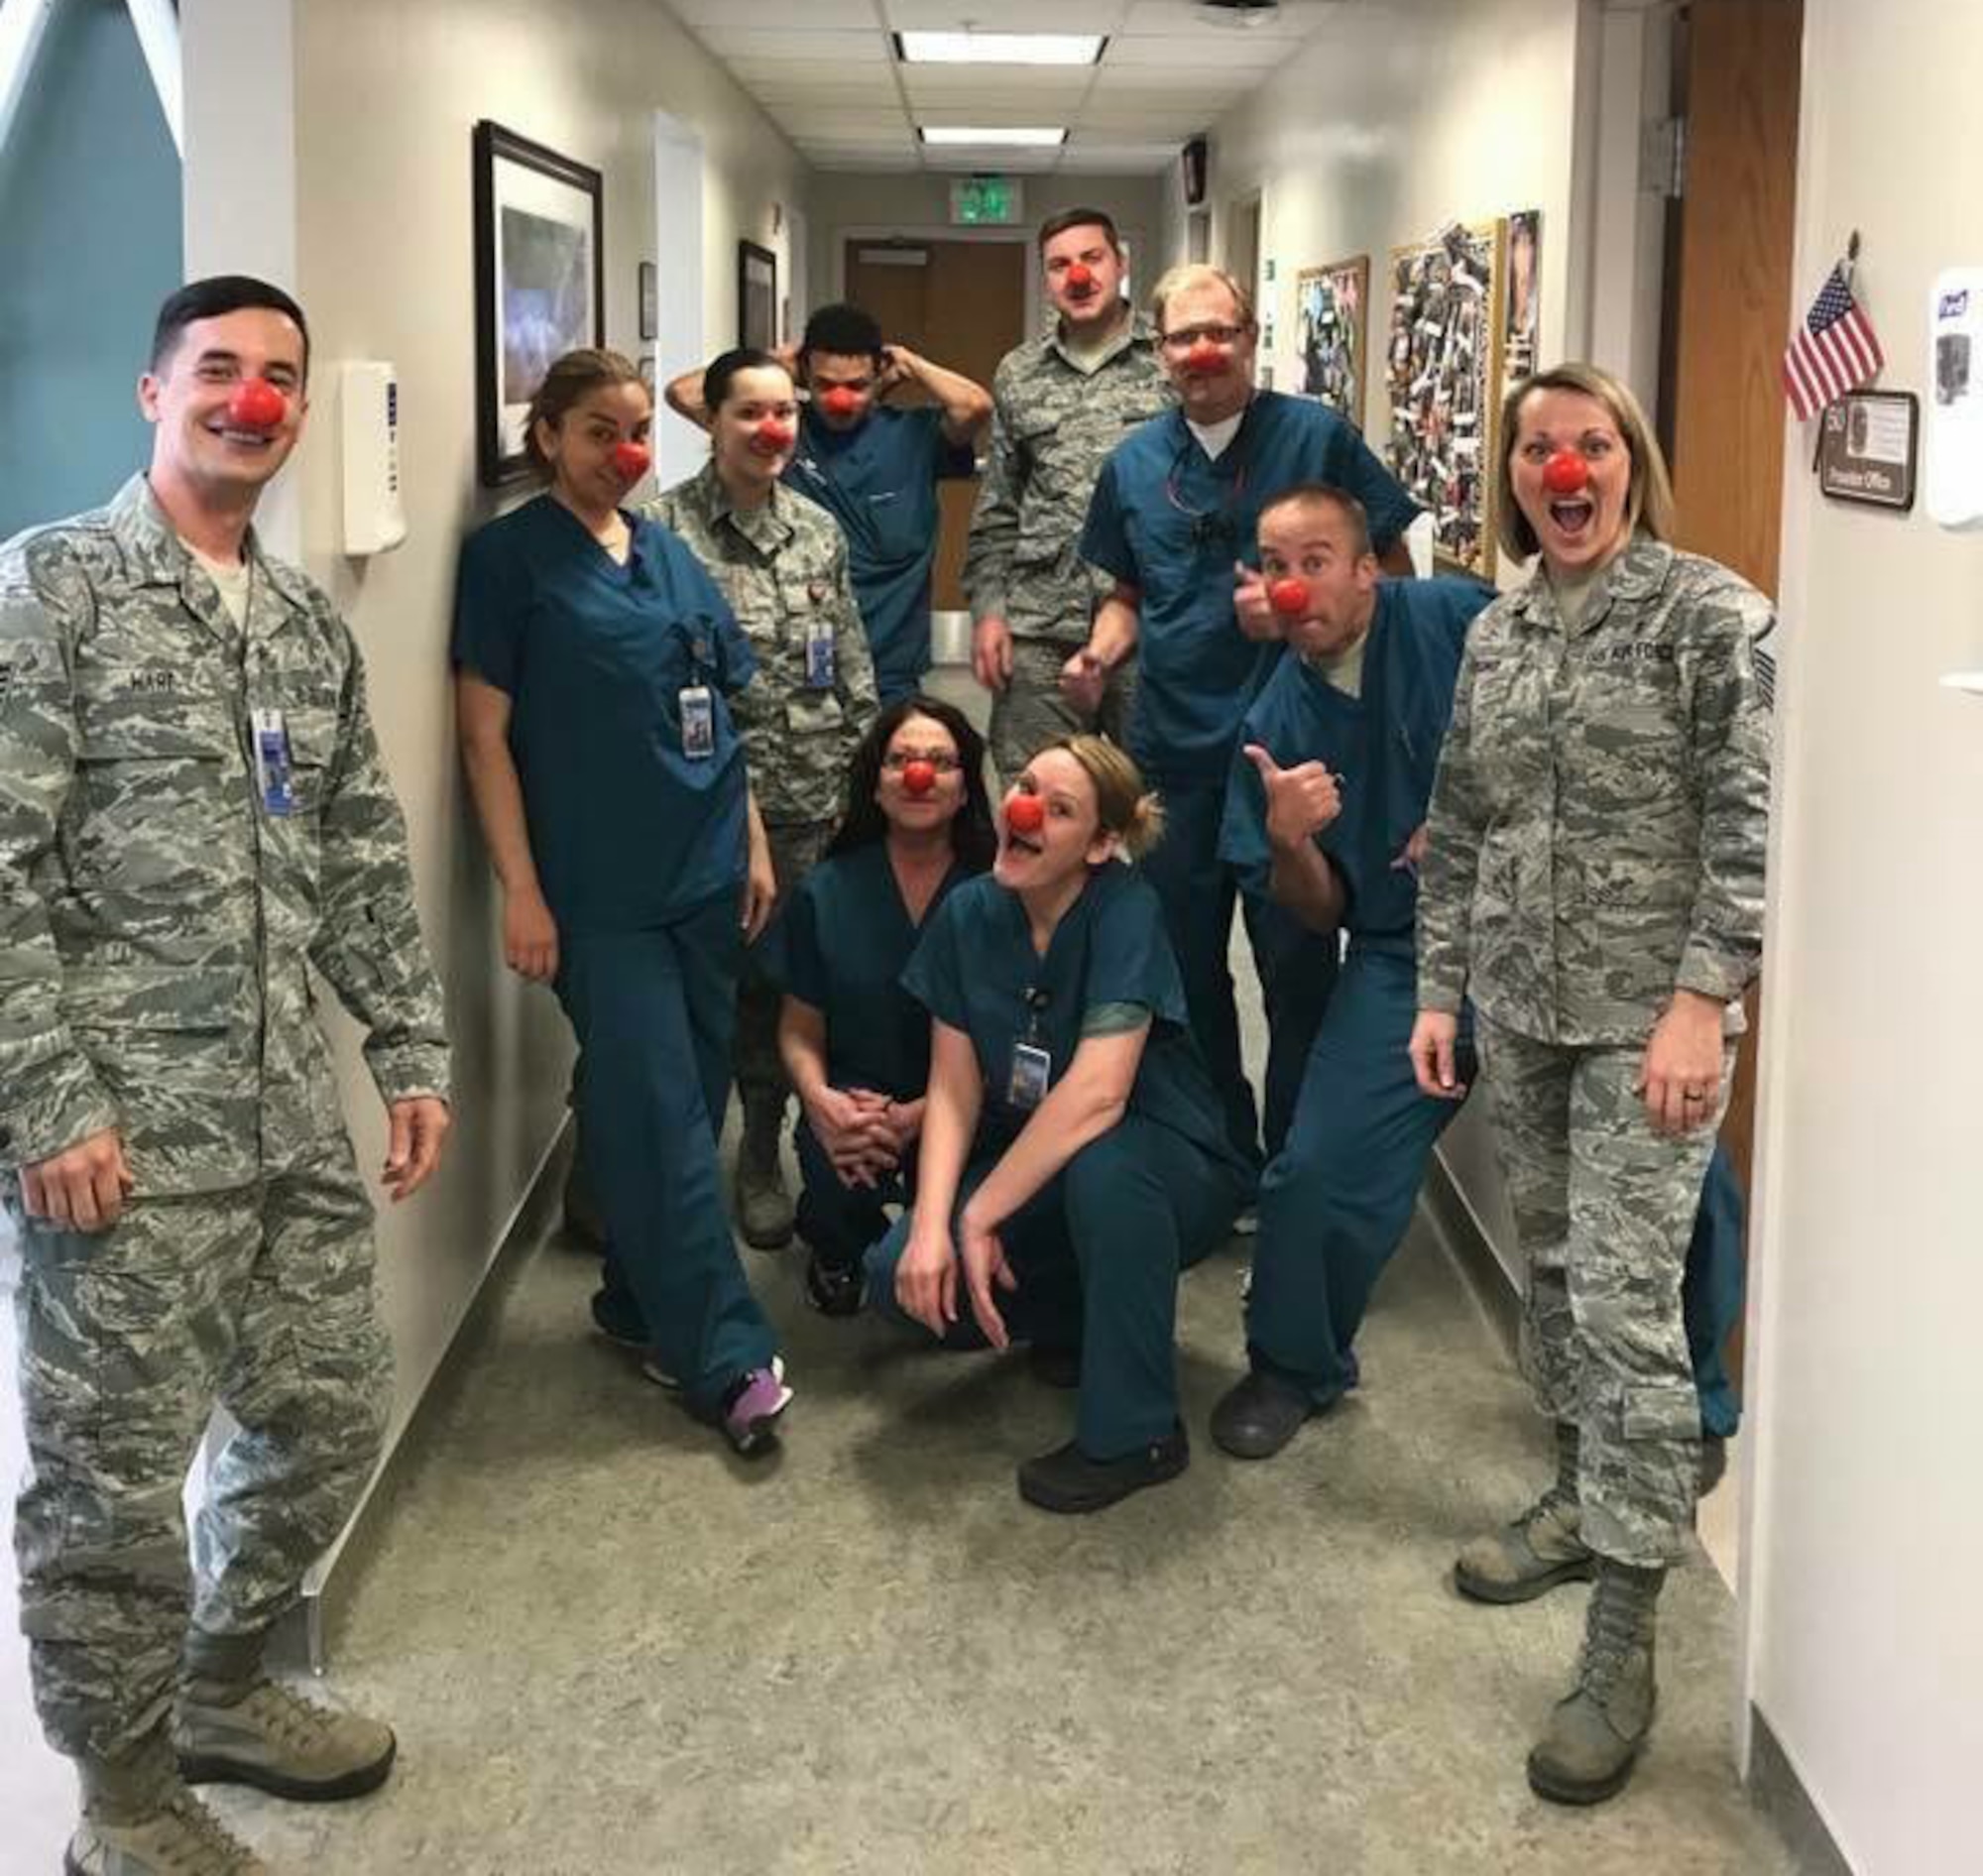 MSgt Ashley Strong (far right), U.S. Air Force dental flight chief out of Schriever Air Force Base, poses with her team for Red Nose Day to raise awareness about children in need on March 24th, 2017. Strong works closely with her team to instill a culture of patient-centered Trusted Care throughout the clinic. (U.S. Air Force photo by SrA Cody Helgeson)